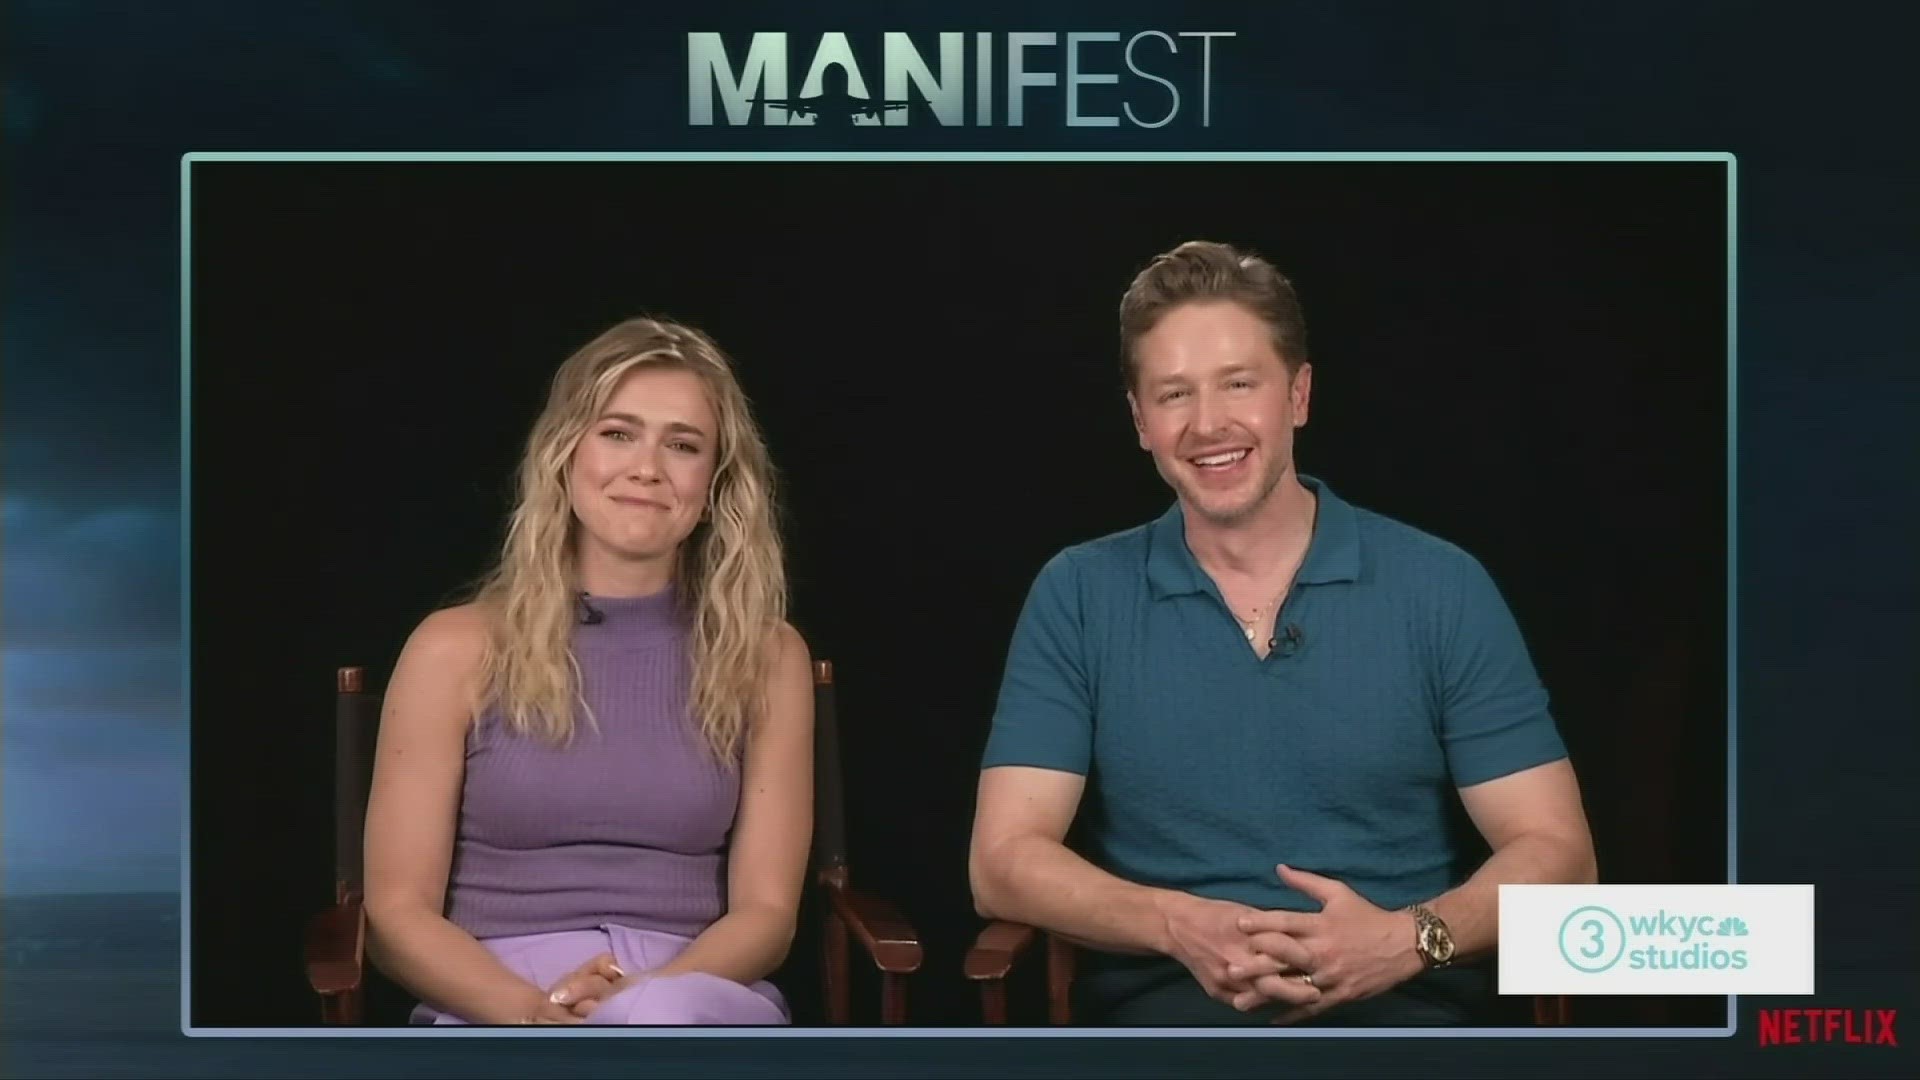 Hollie chats with Manifest stars Josh Dallas and Melissa Roxburgh about the show's final half-season, which just dropped today on Netflix.